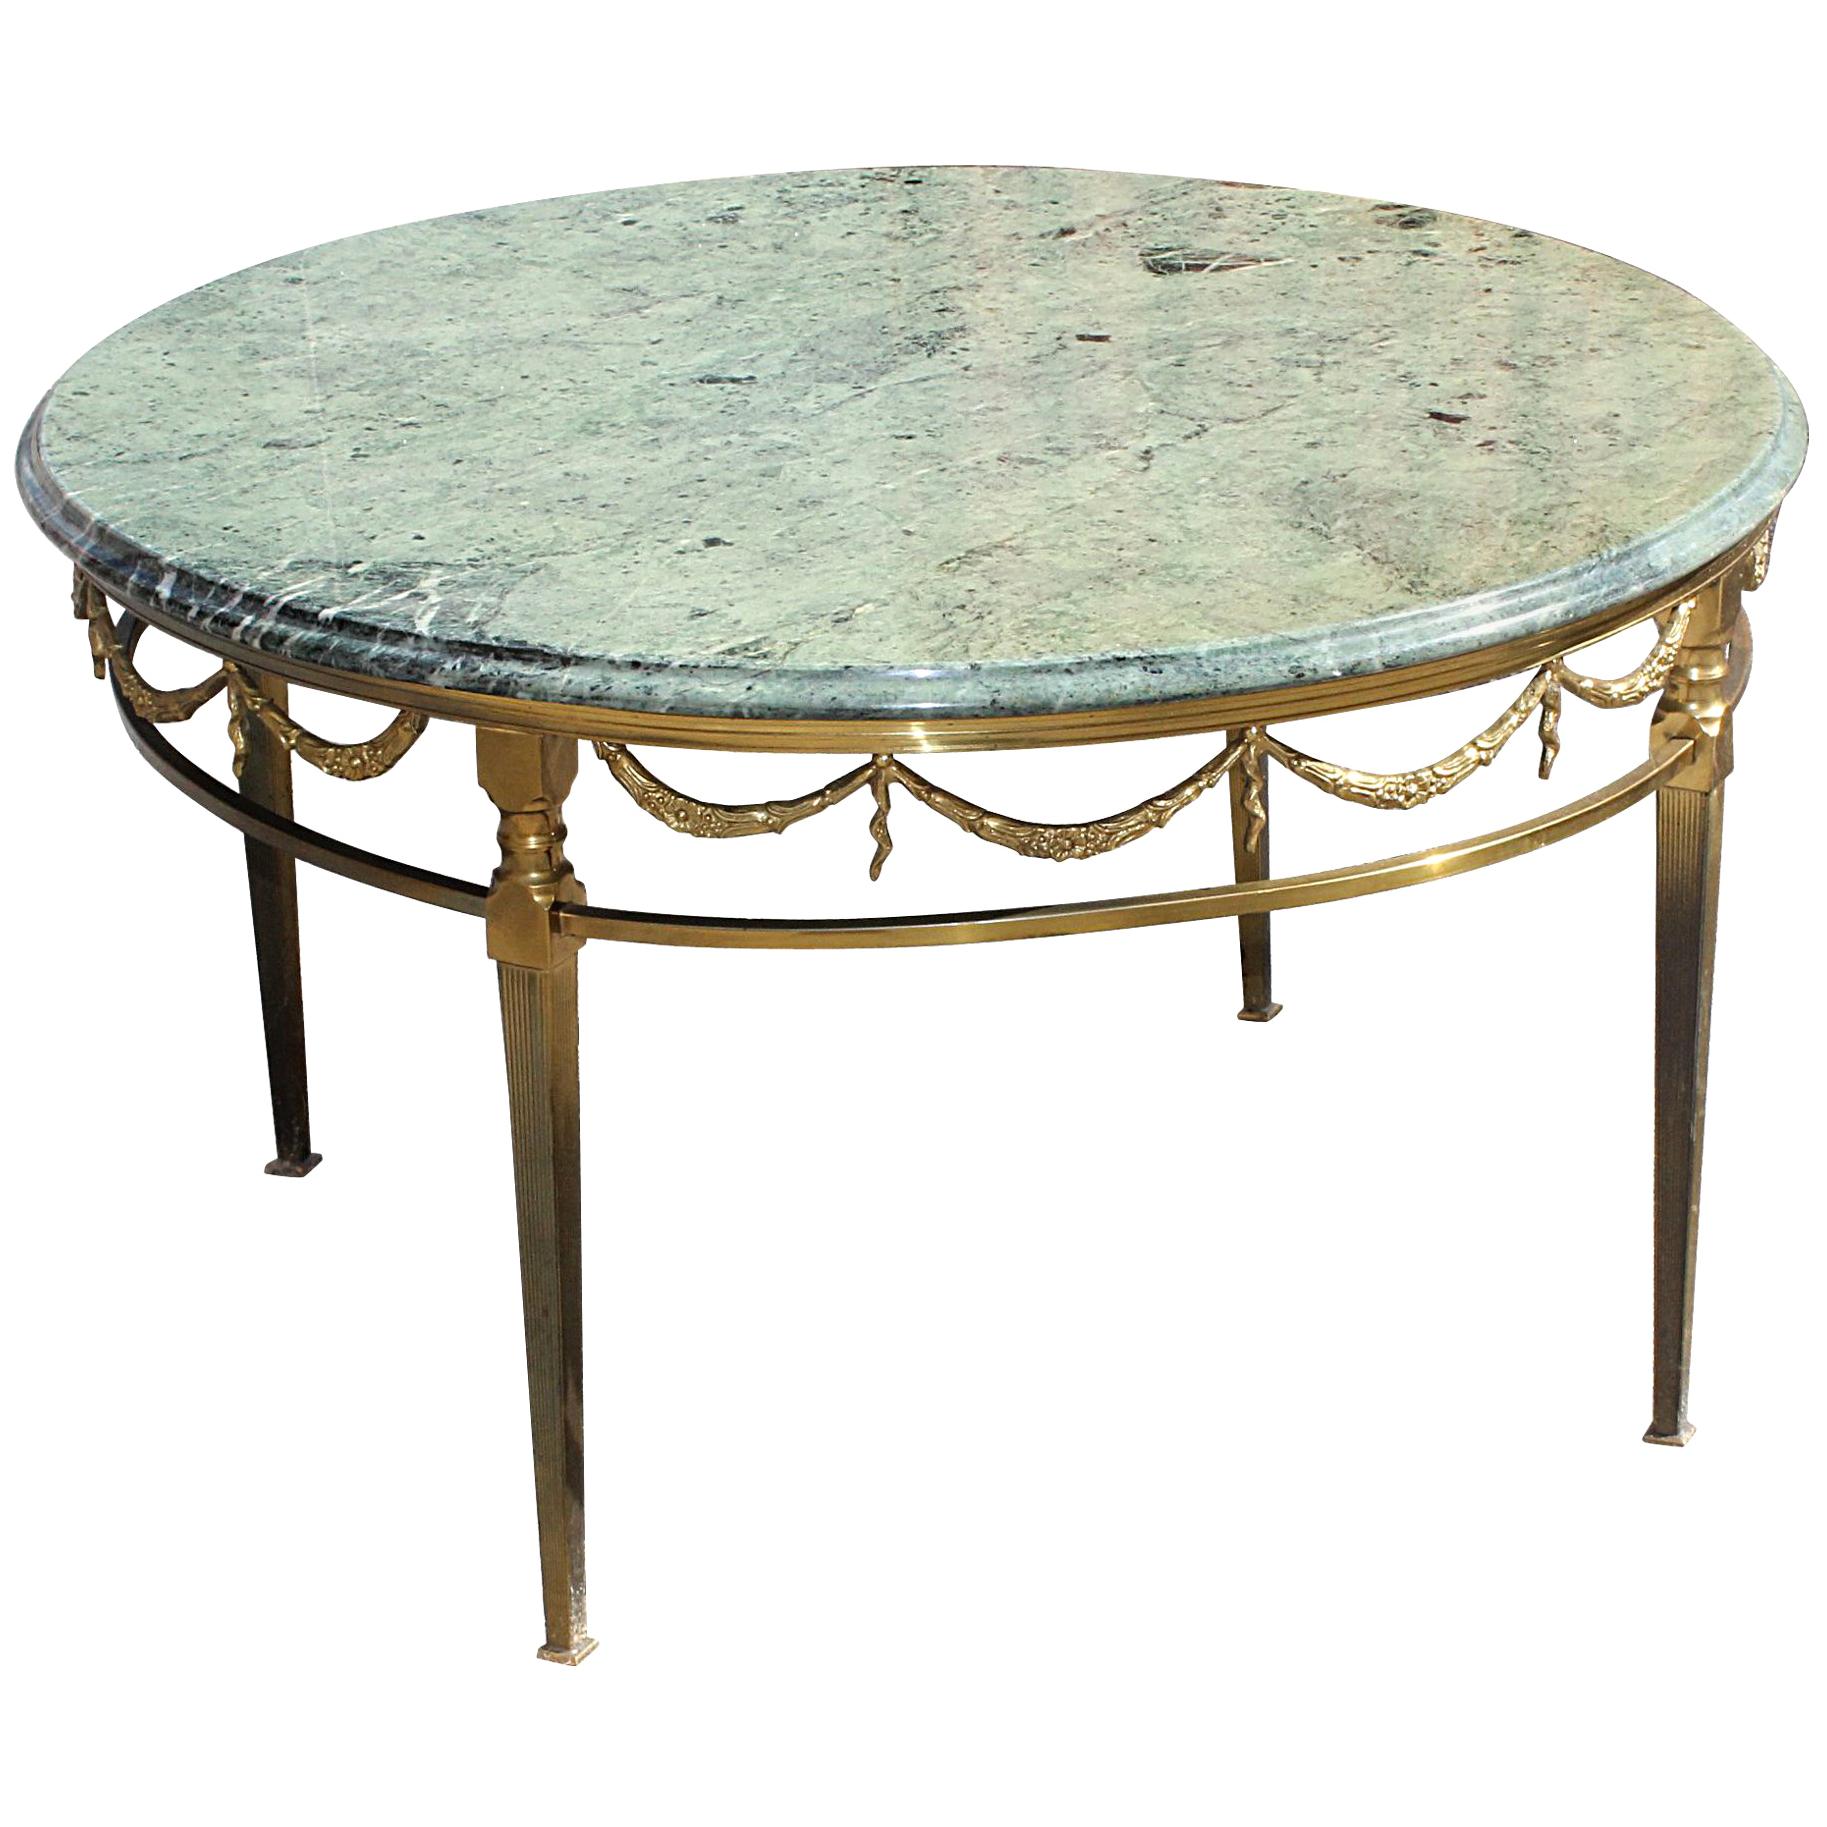 French Maison Jansen Round Coffee Table Bronze with Marble Top, circa 1940s